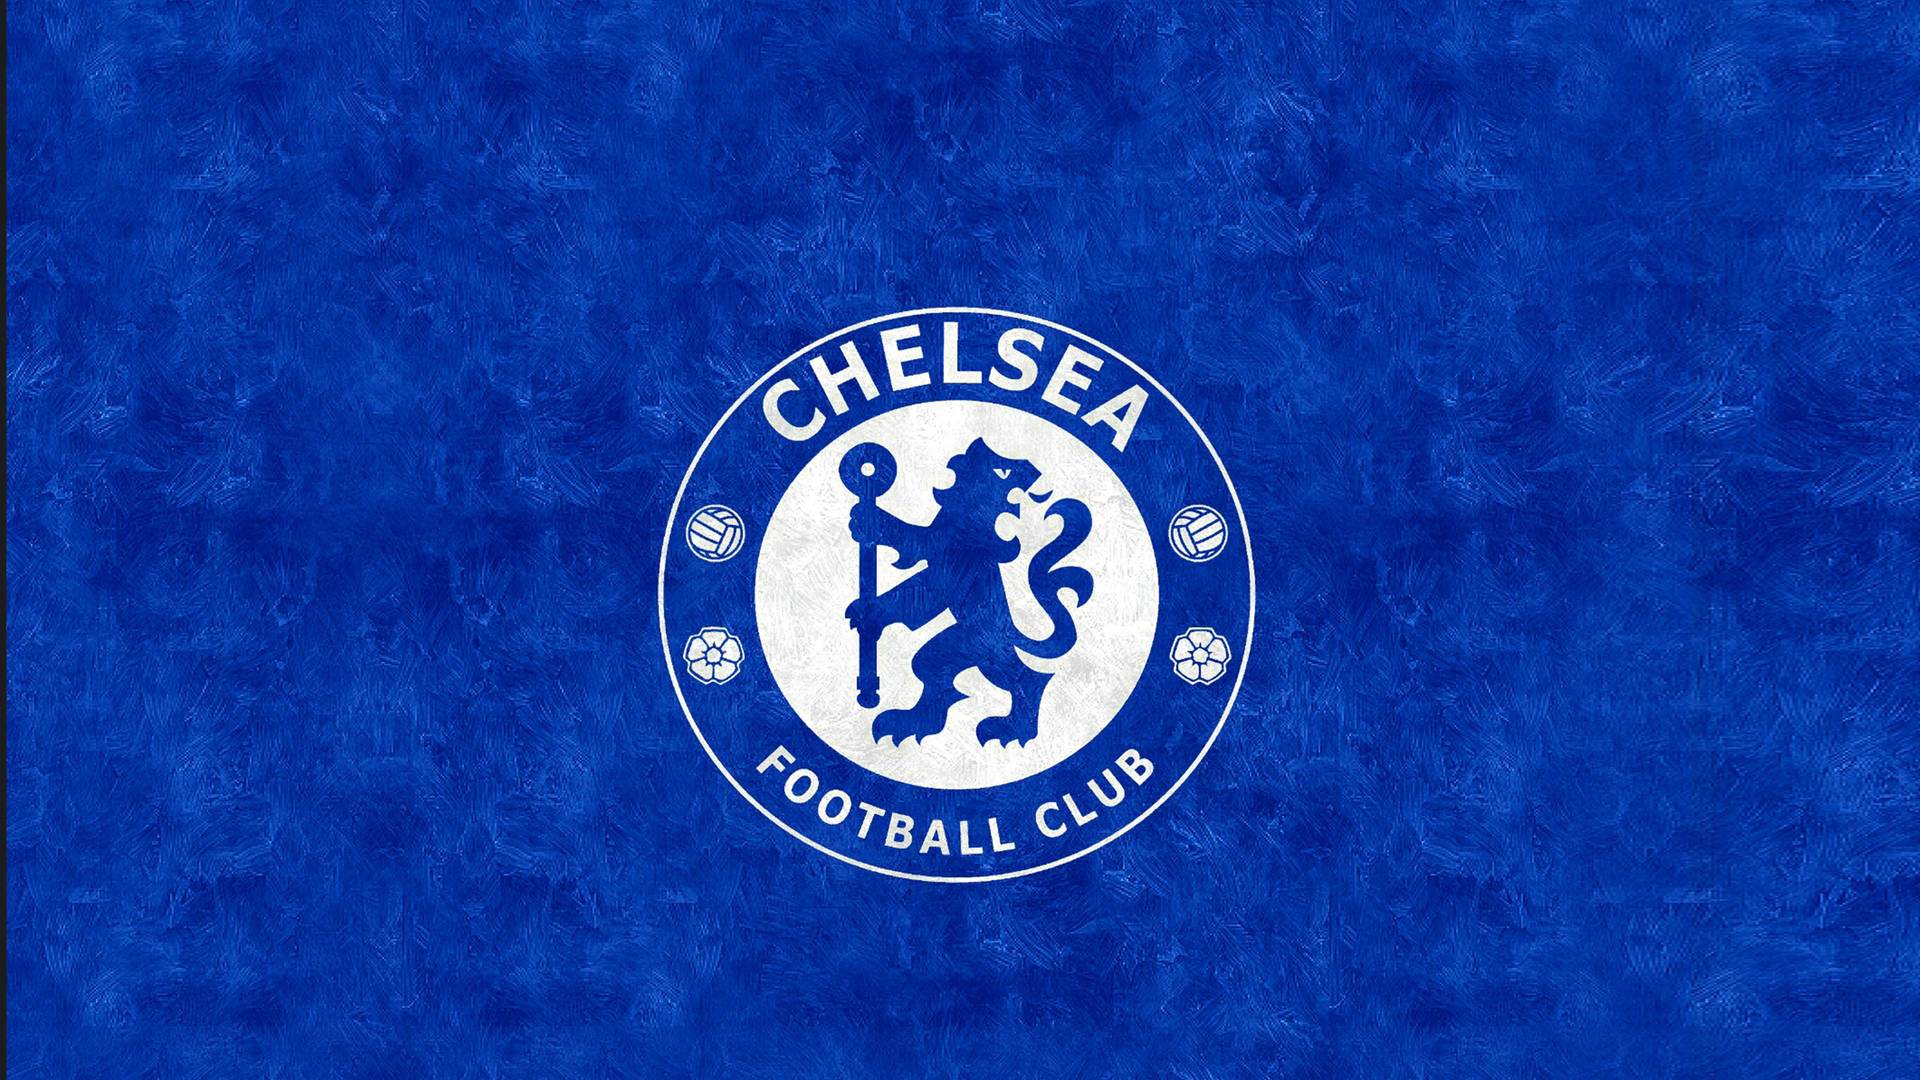 Chelsea Fc In Grunge Blue Background